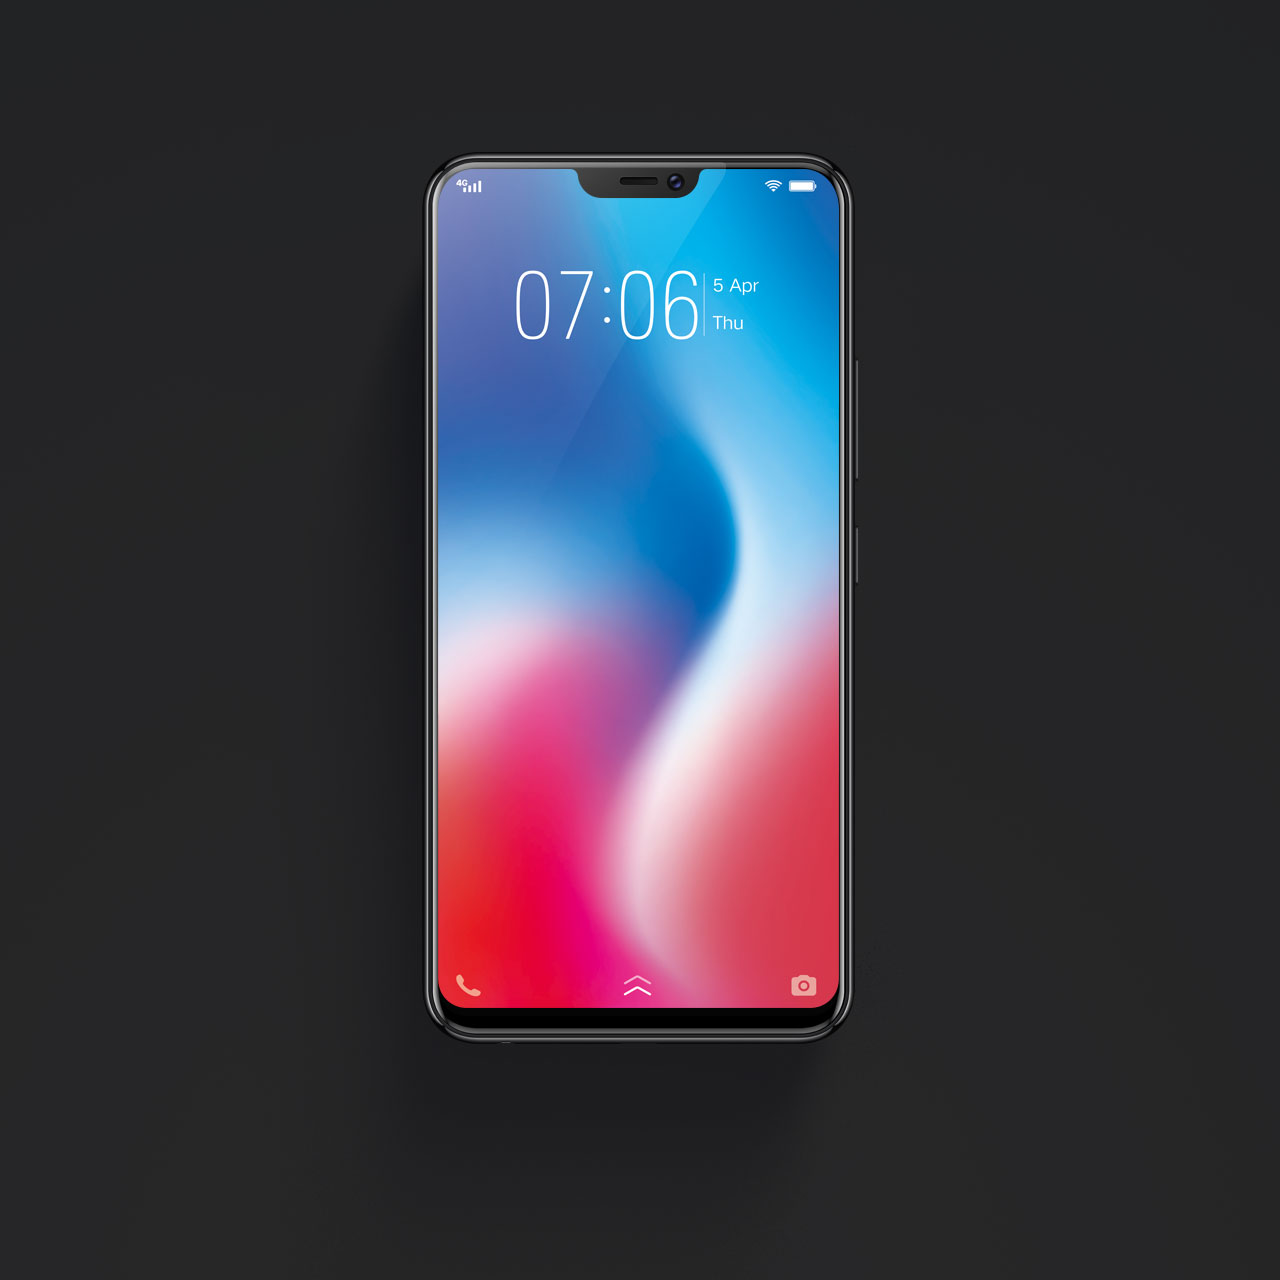 Vivo V9 with iPhone X like notch powered by SD626 SoC 